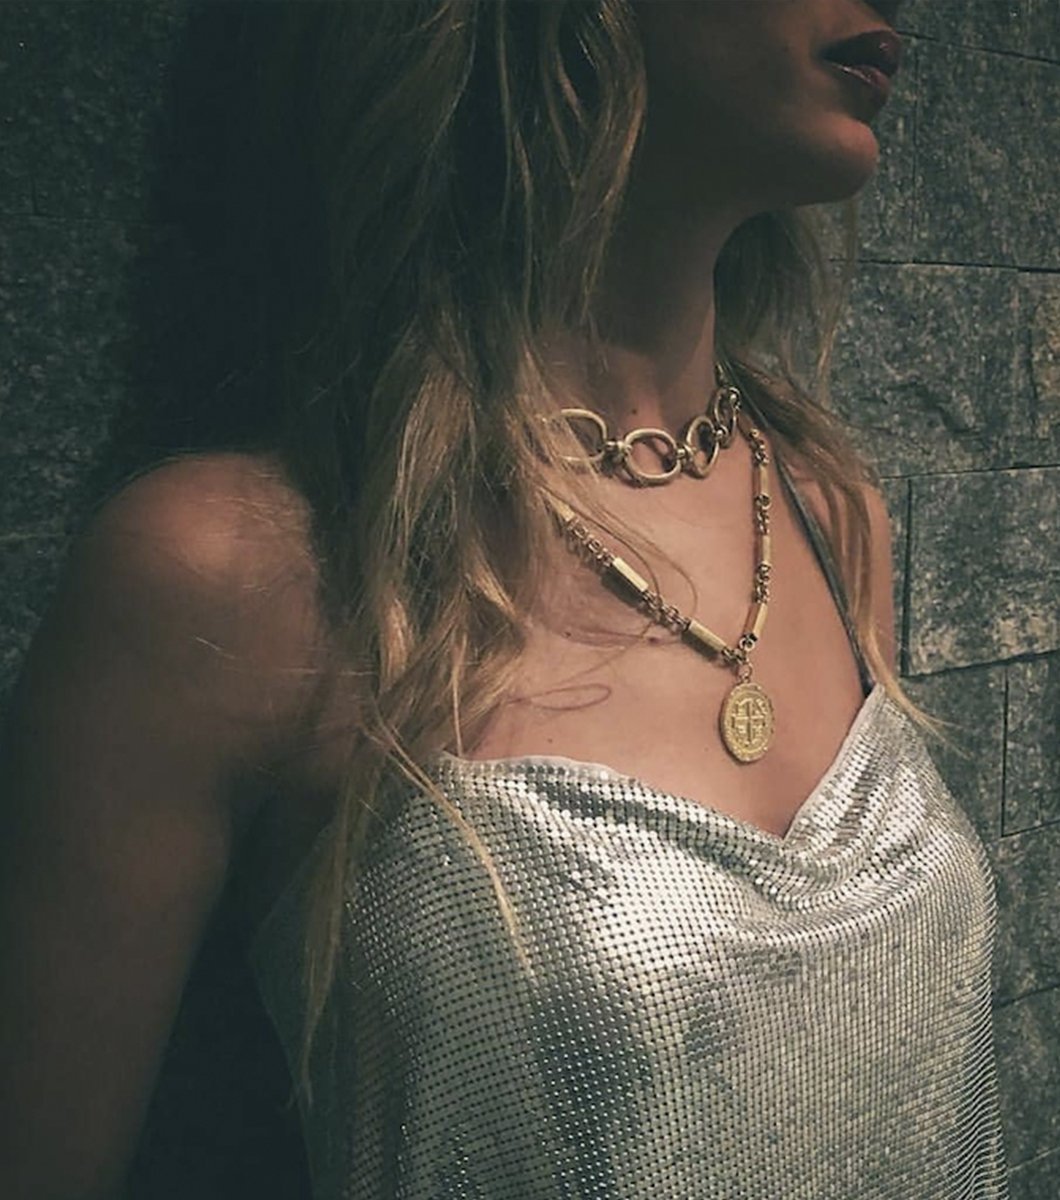 Lena Coin Necklace - LAURA CANTU JEWELRY US